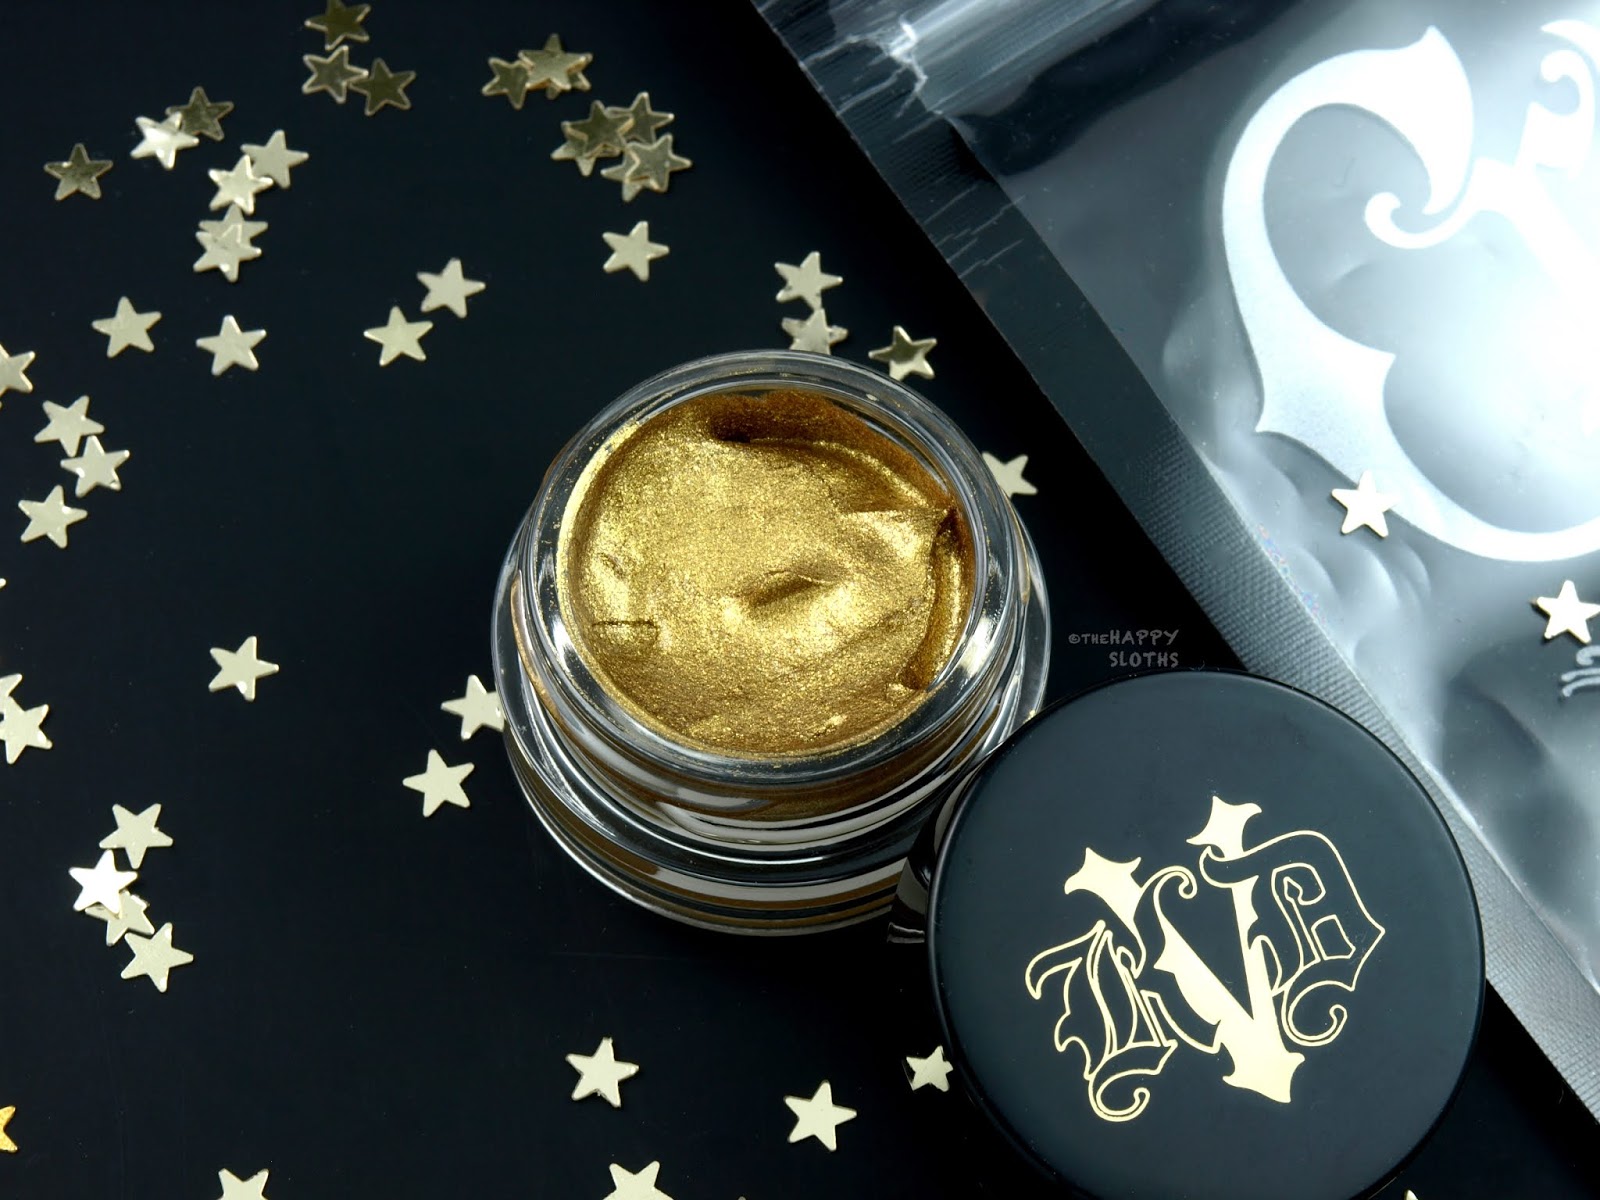 Kat Von D | Glitter Gel for Face & Body in "Tesoro Gold": Review and Swatches